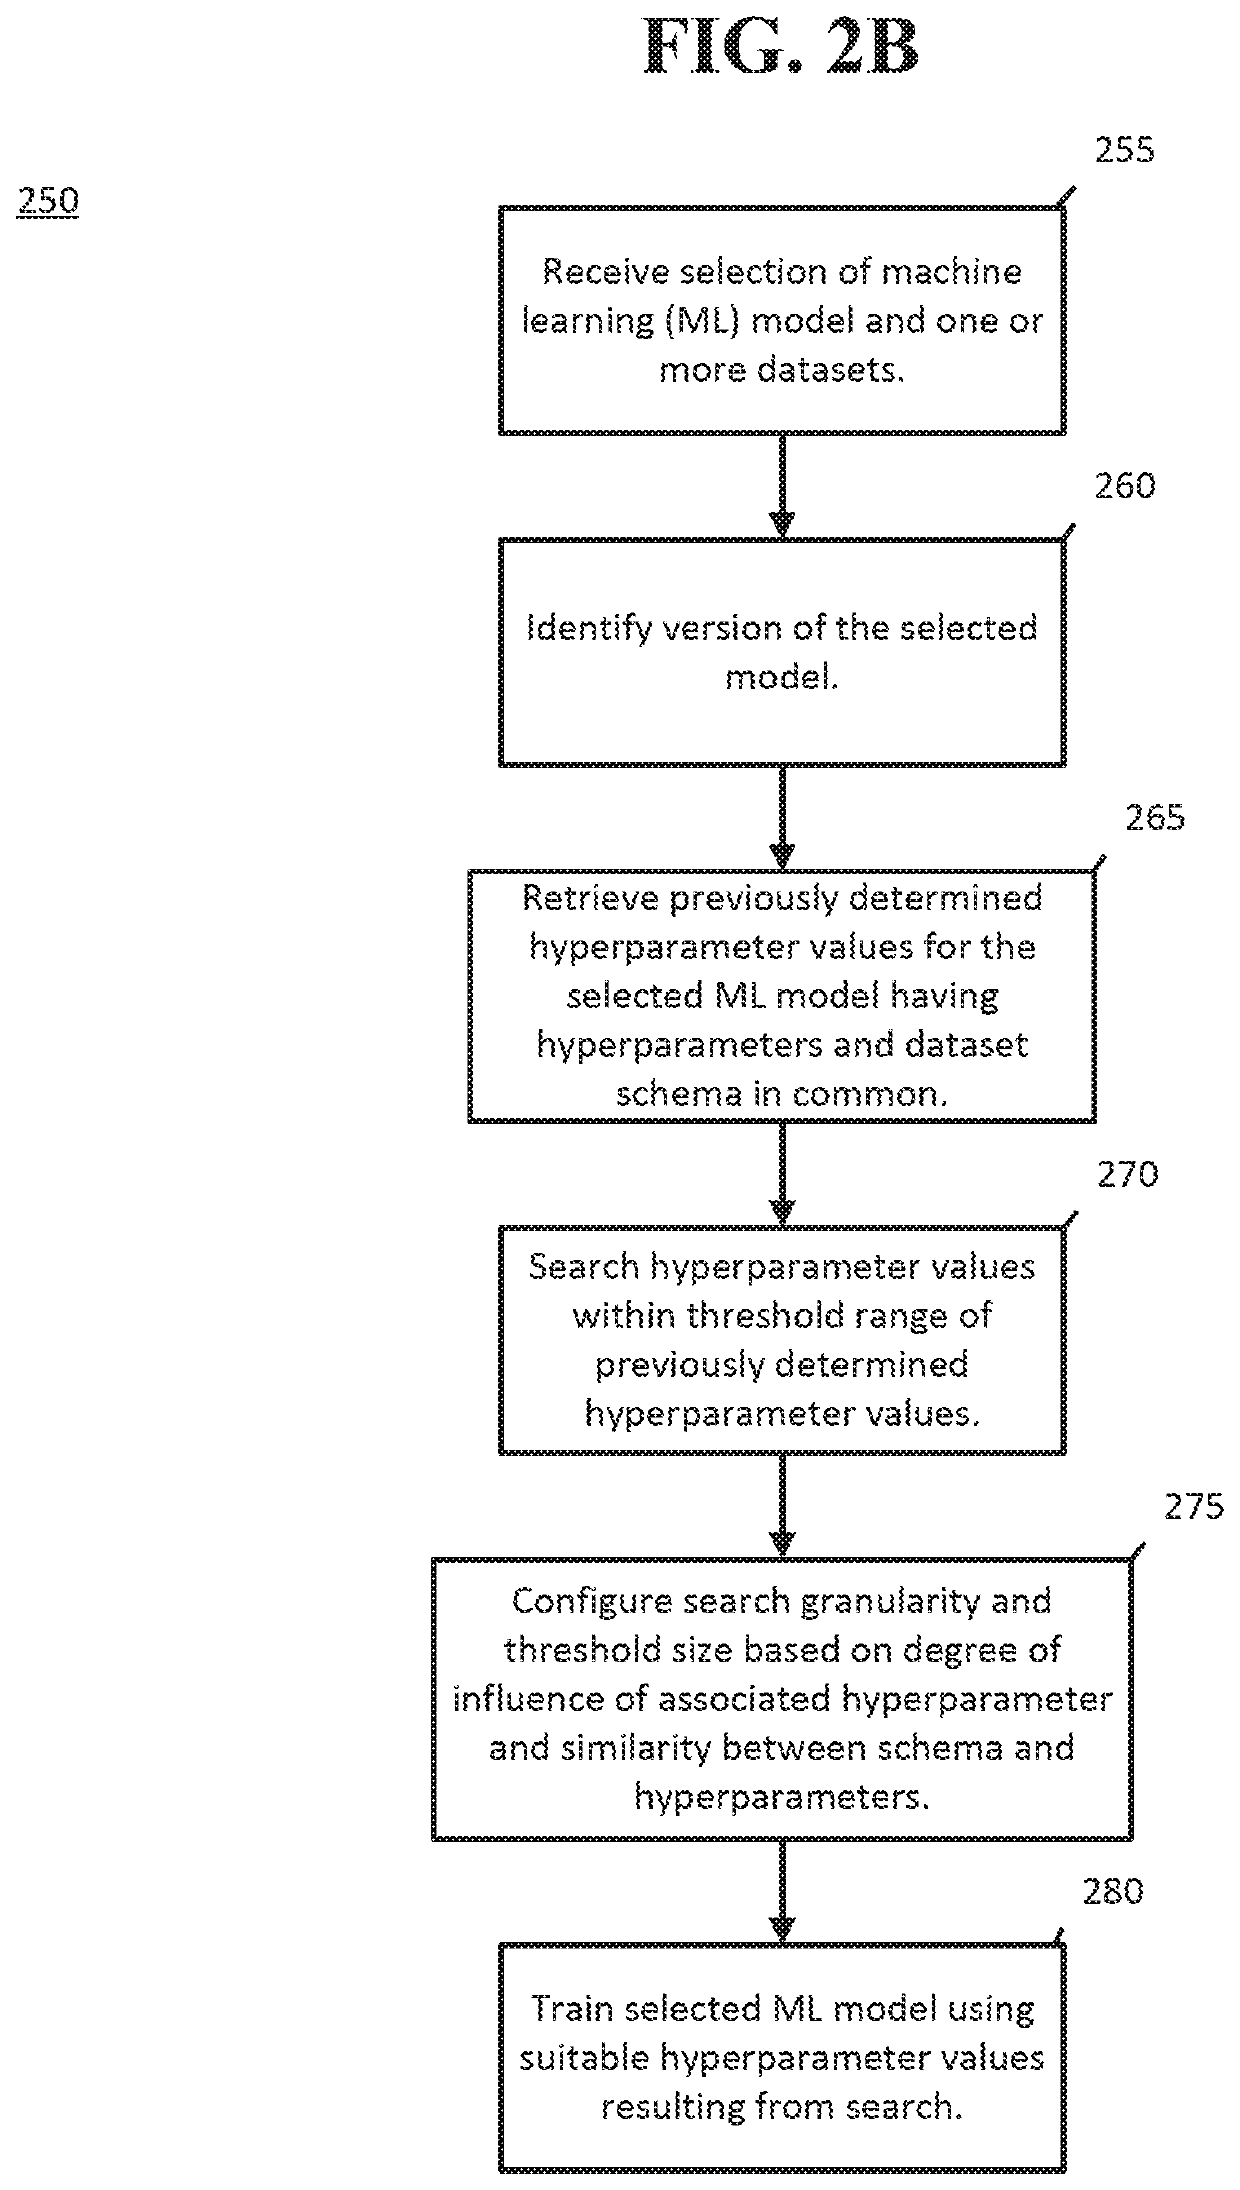 Identification and application of hyperparameters for machine learning